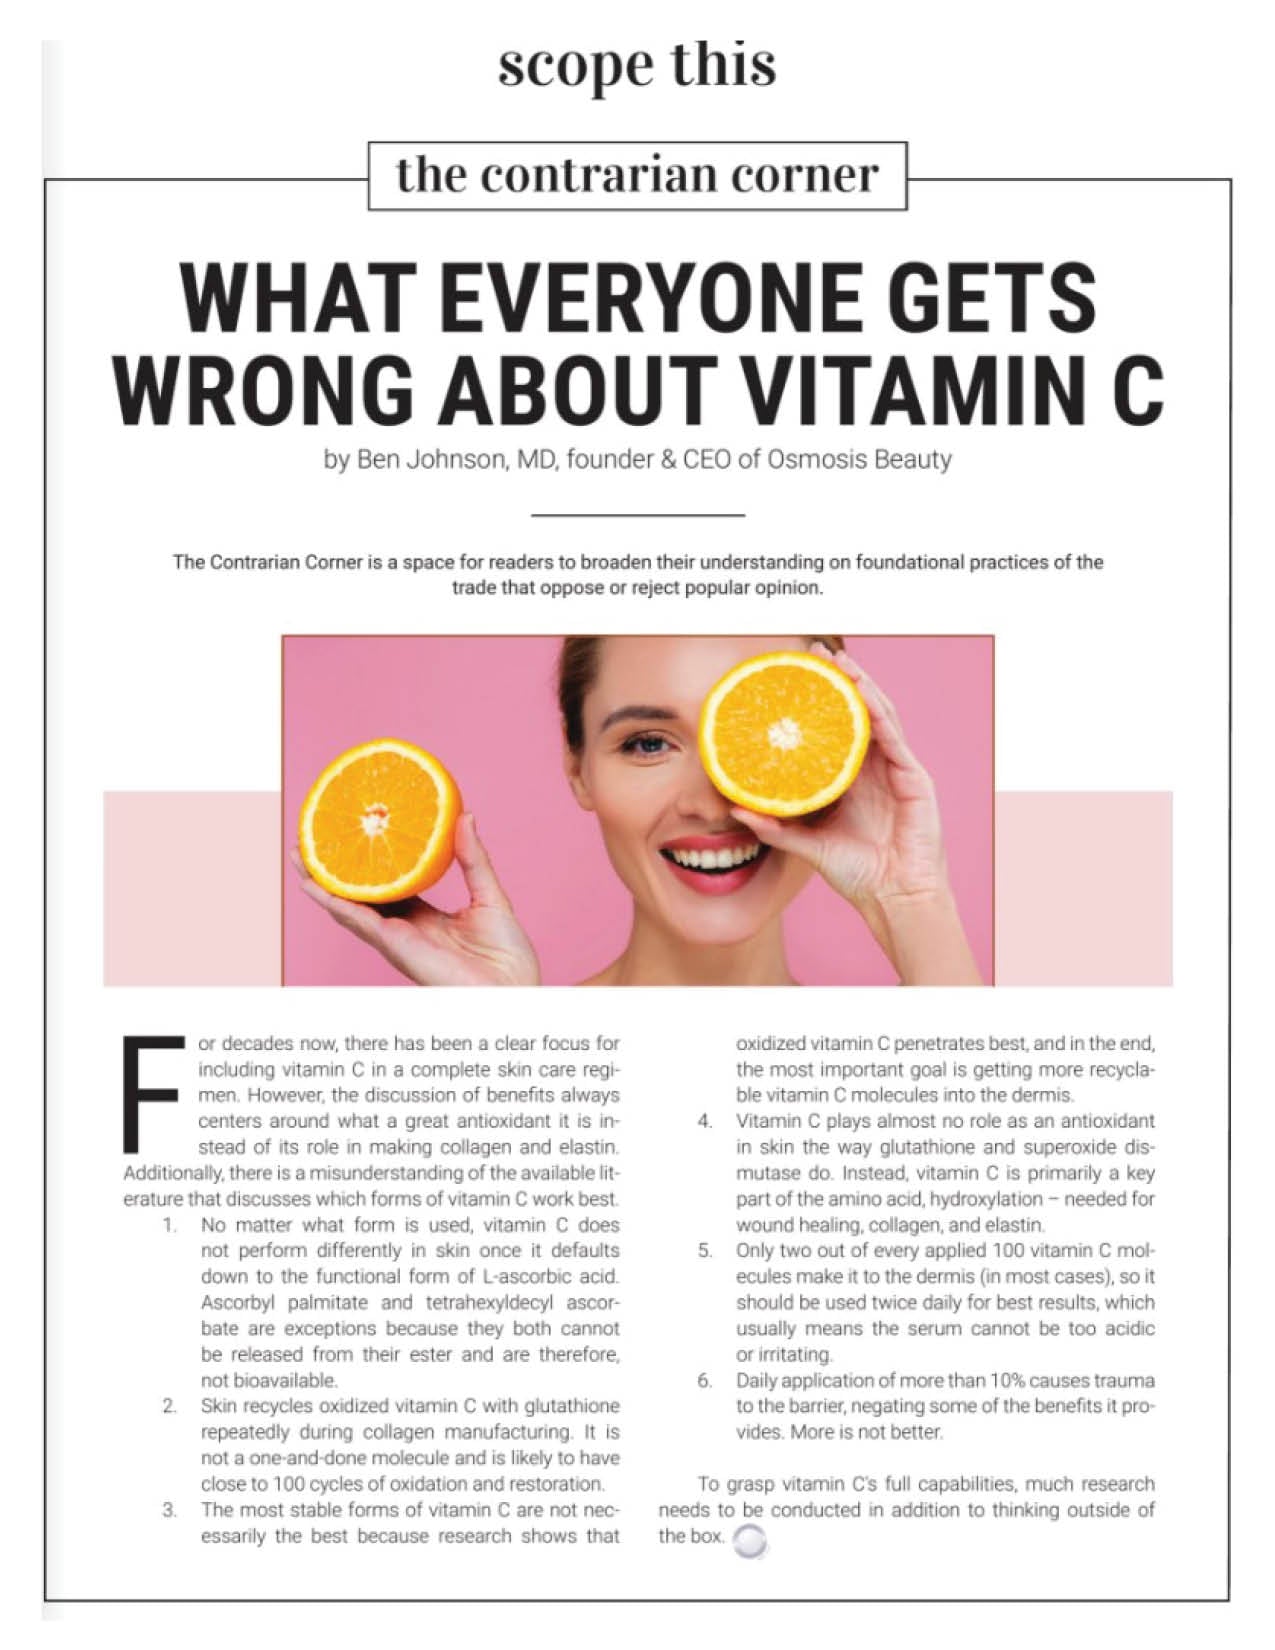 Dr Ben Johnson featured in editorial about Vitamin C